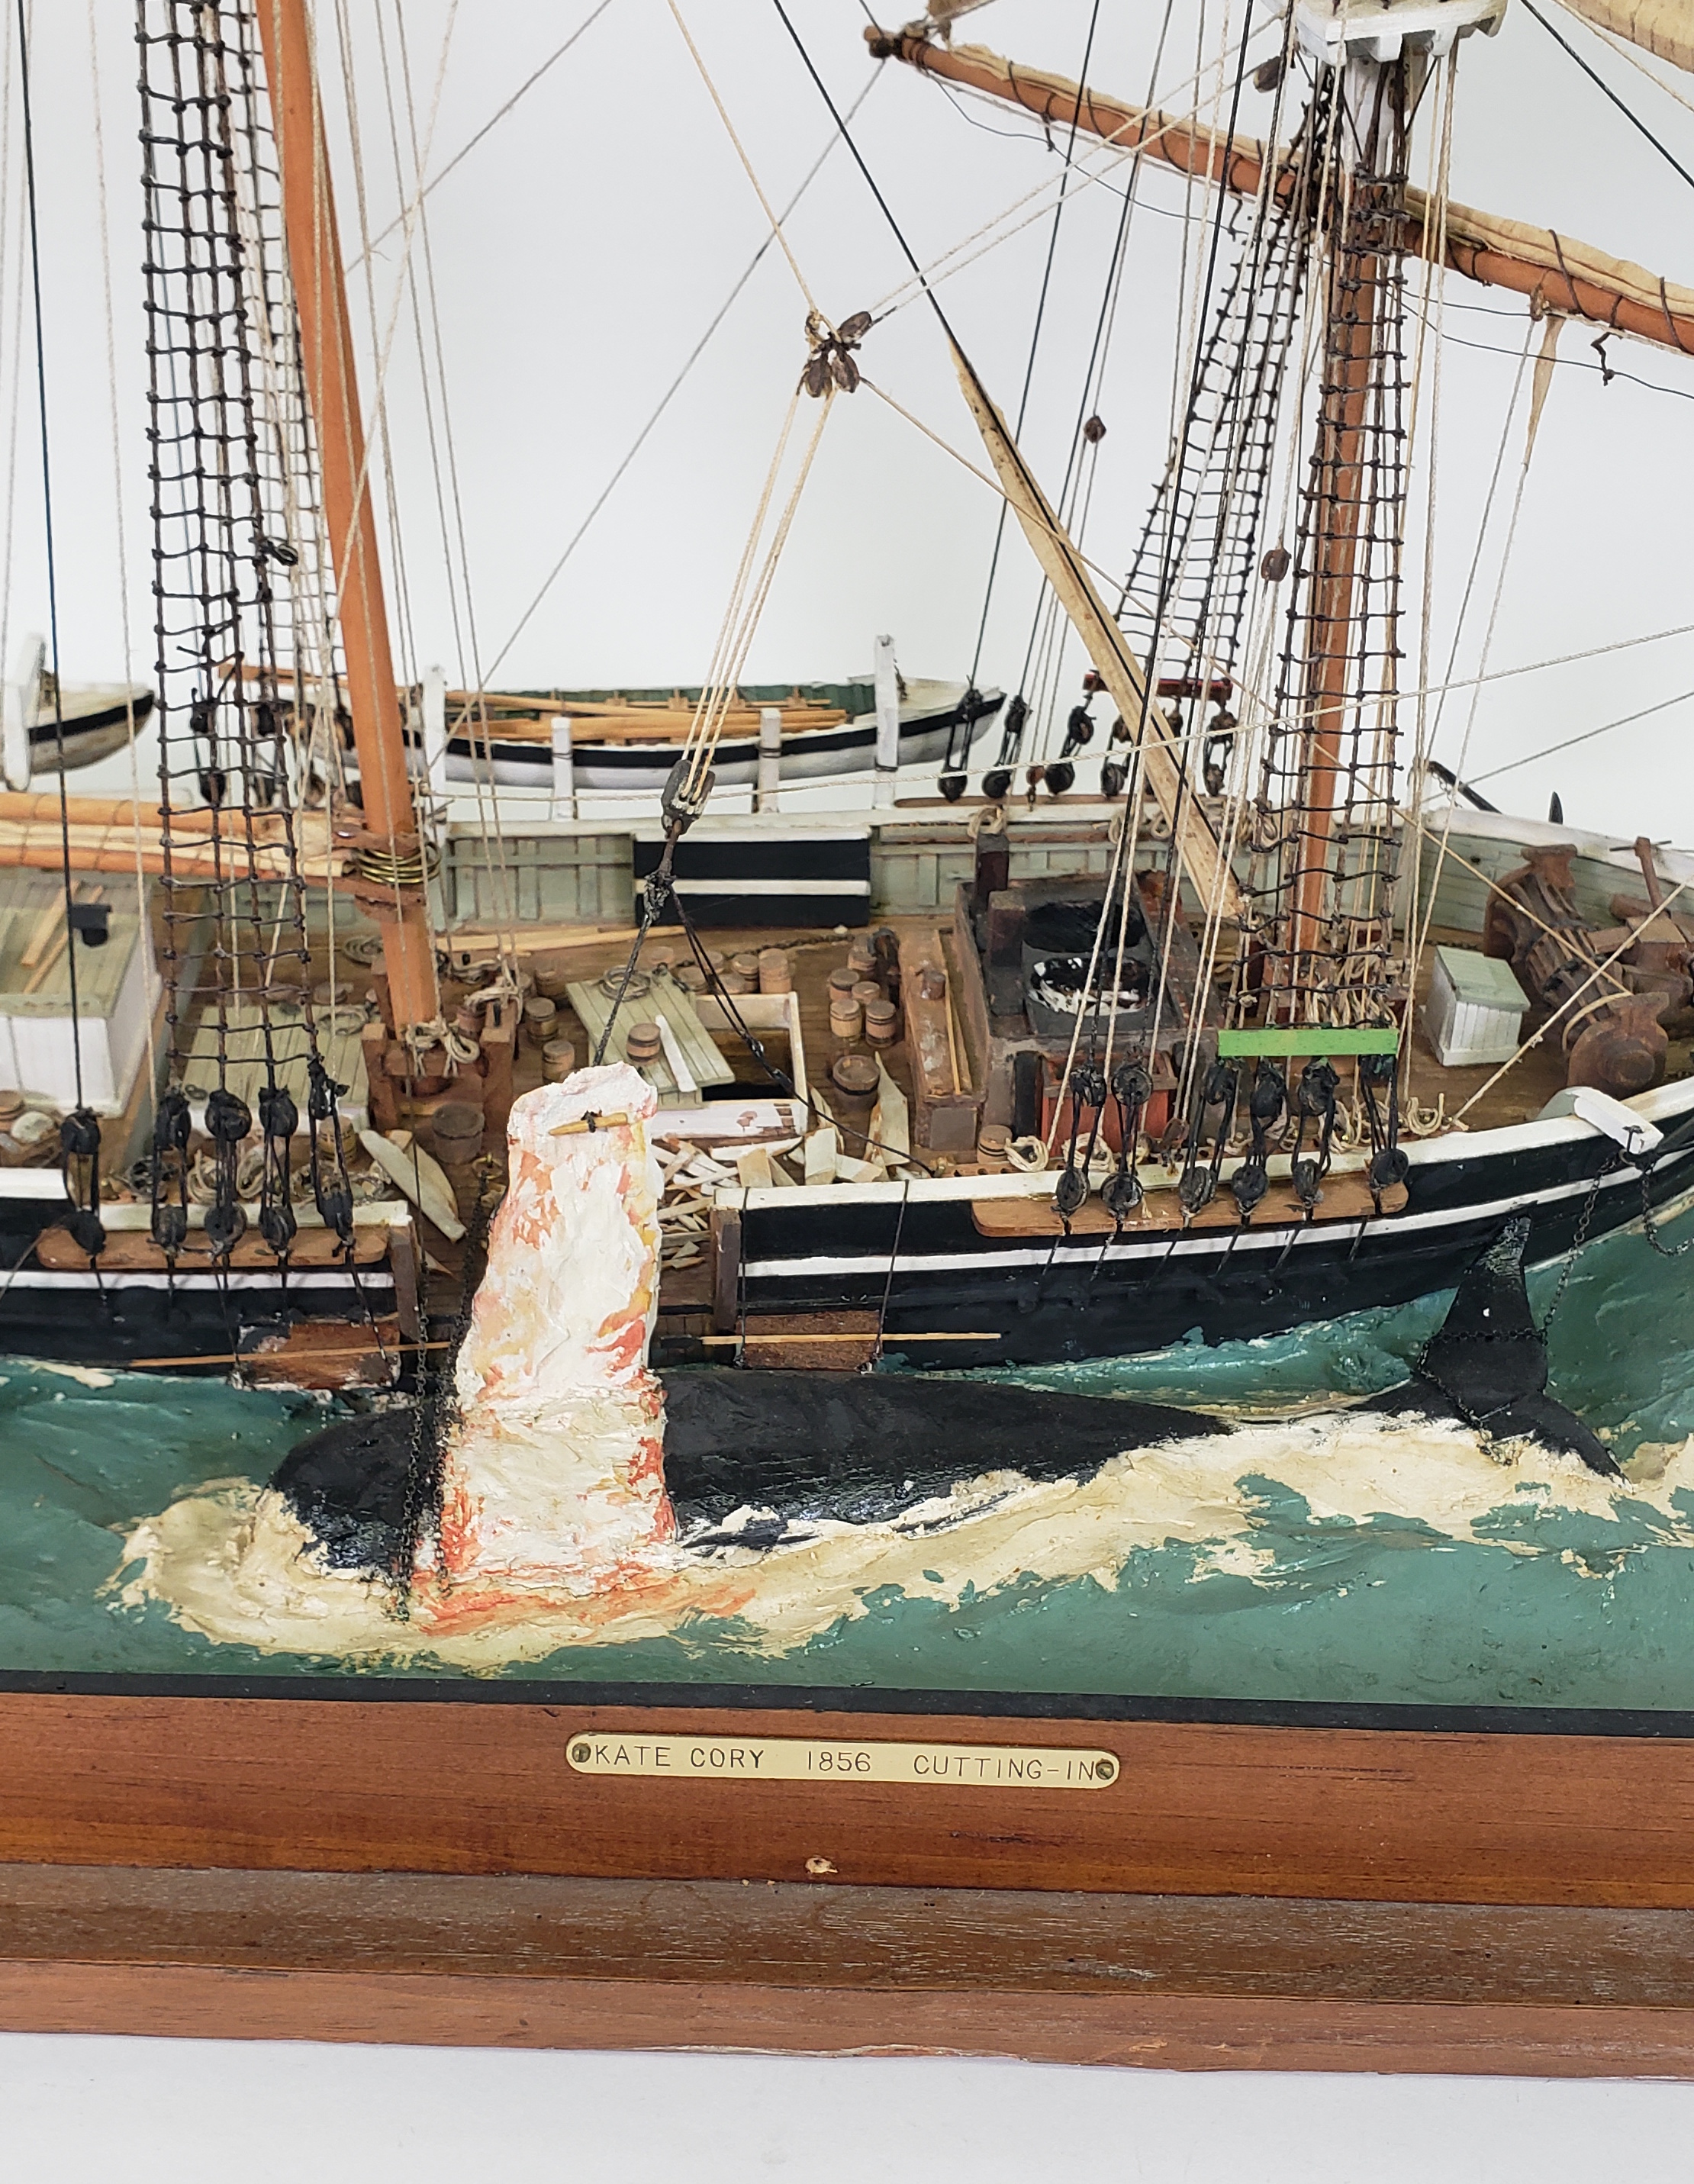 Vintage Carved and Painted Whale Ship Model, “Cutting In”